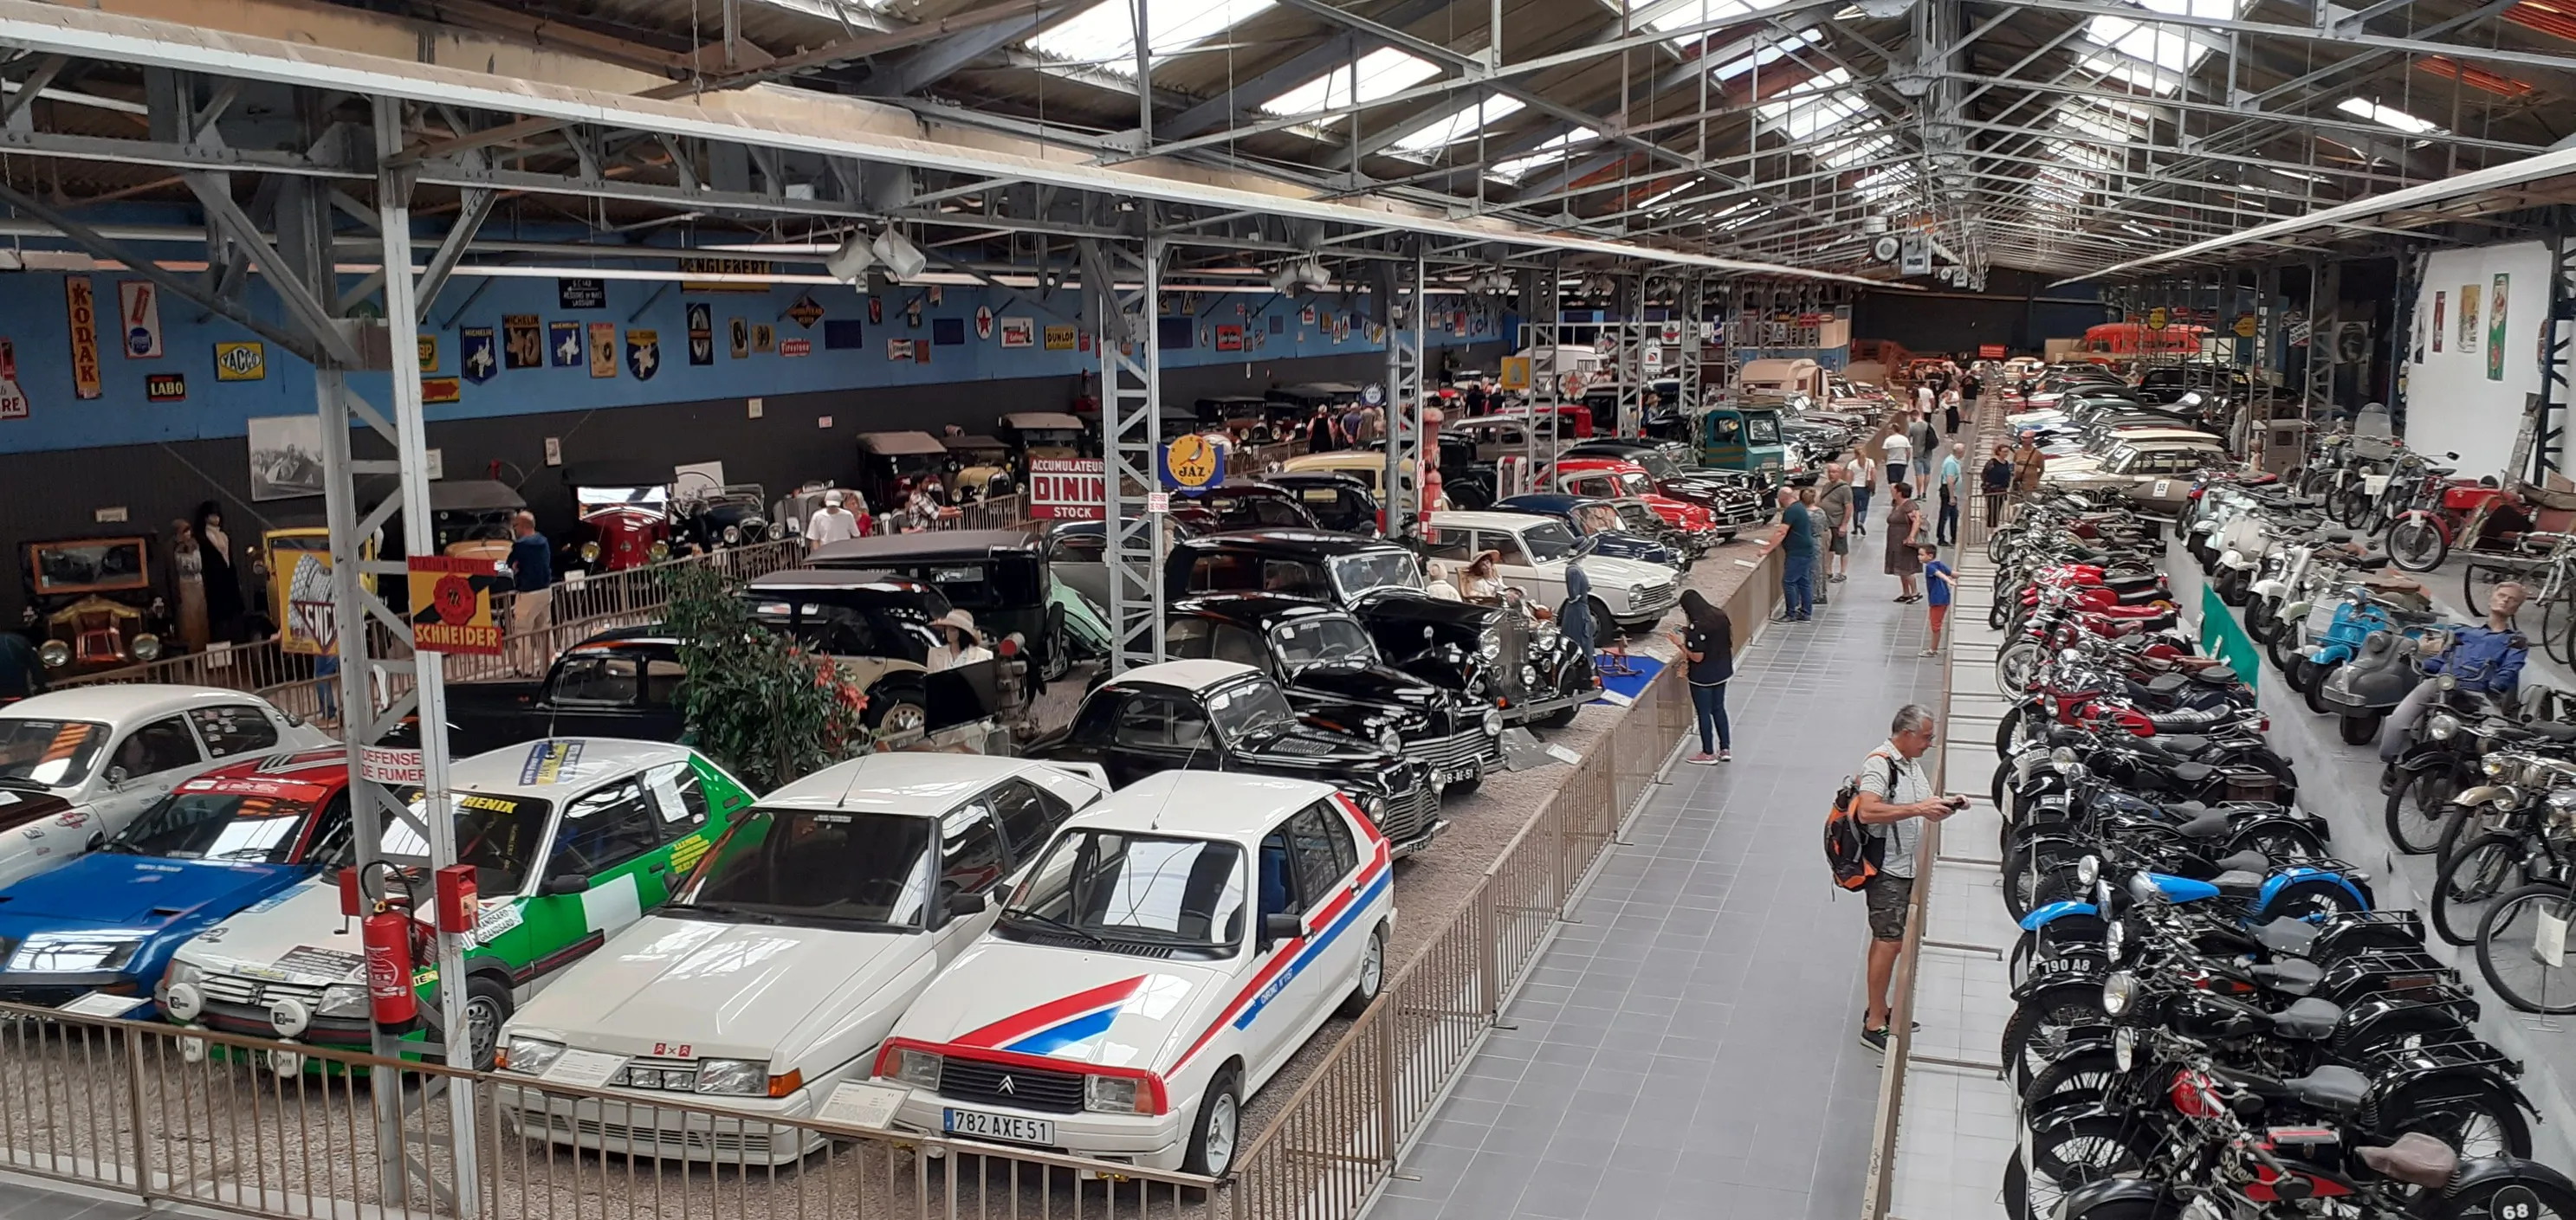 Reims-Champagne Automobile Museum in France, Europe | Museums - Rated 3.5